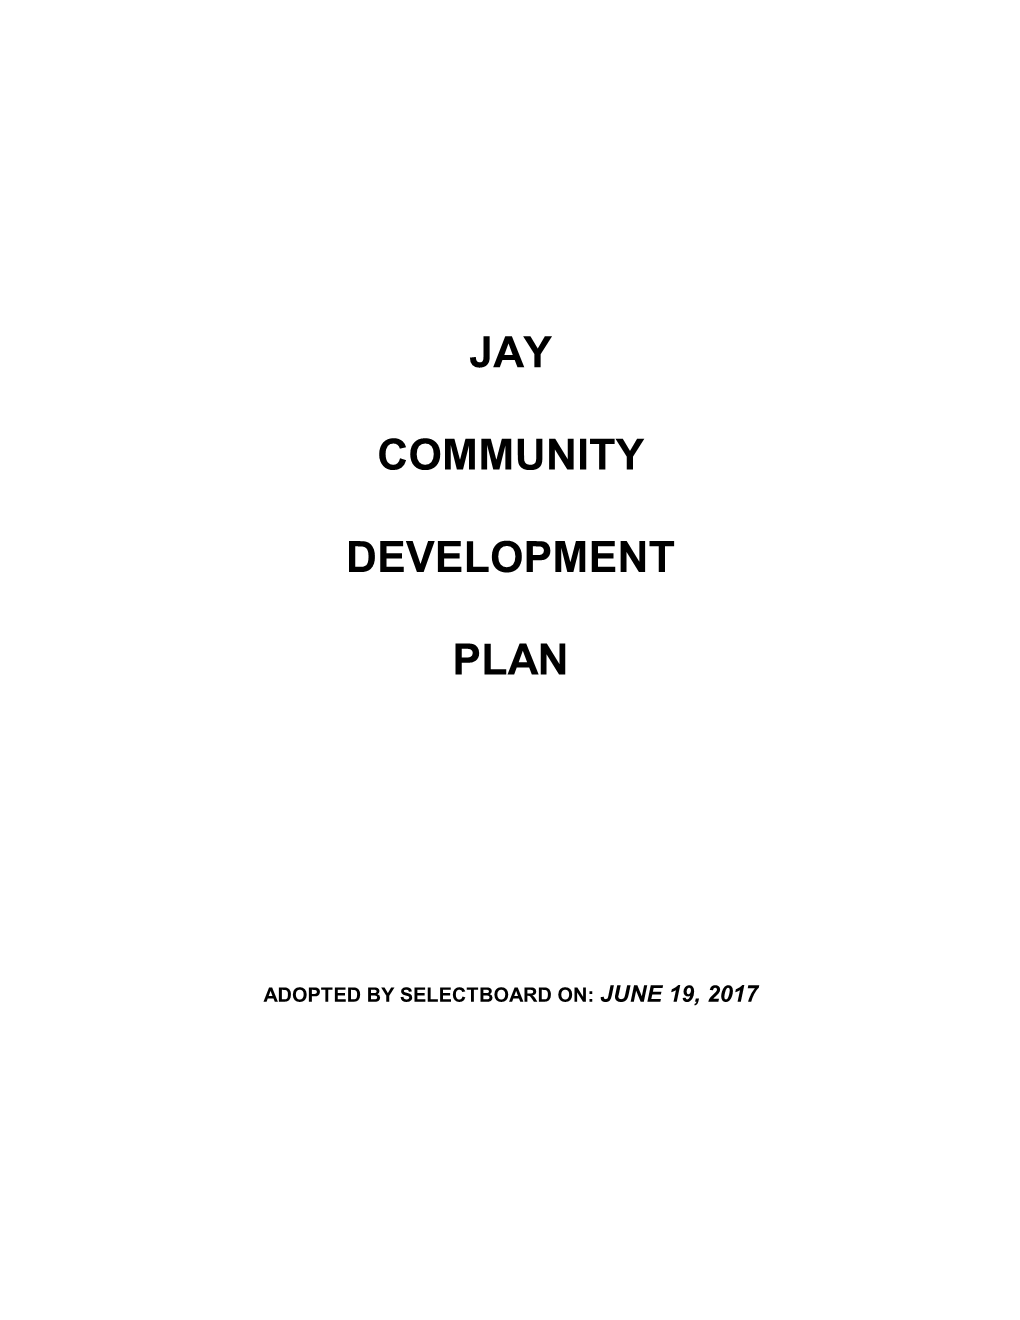 Jay Town Plan, the Jay Screening of Solar/Wind Facilities Ordinance, and the Jay Land Use and Development Regulations